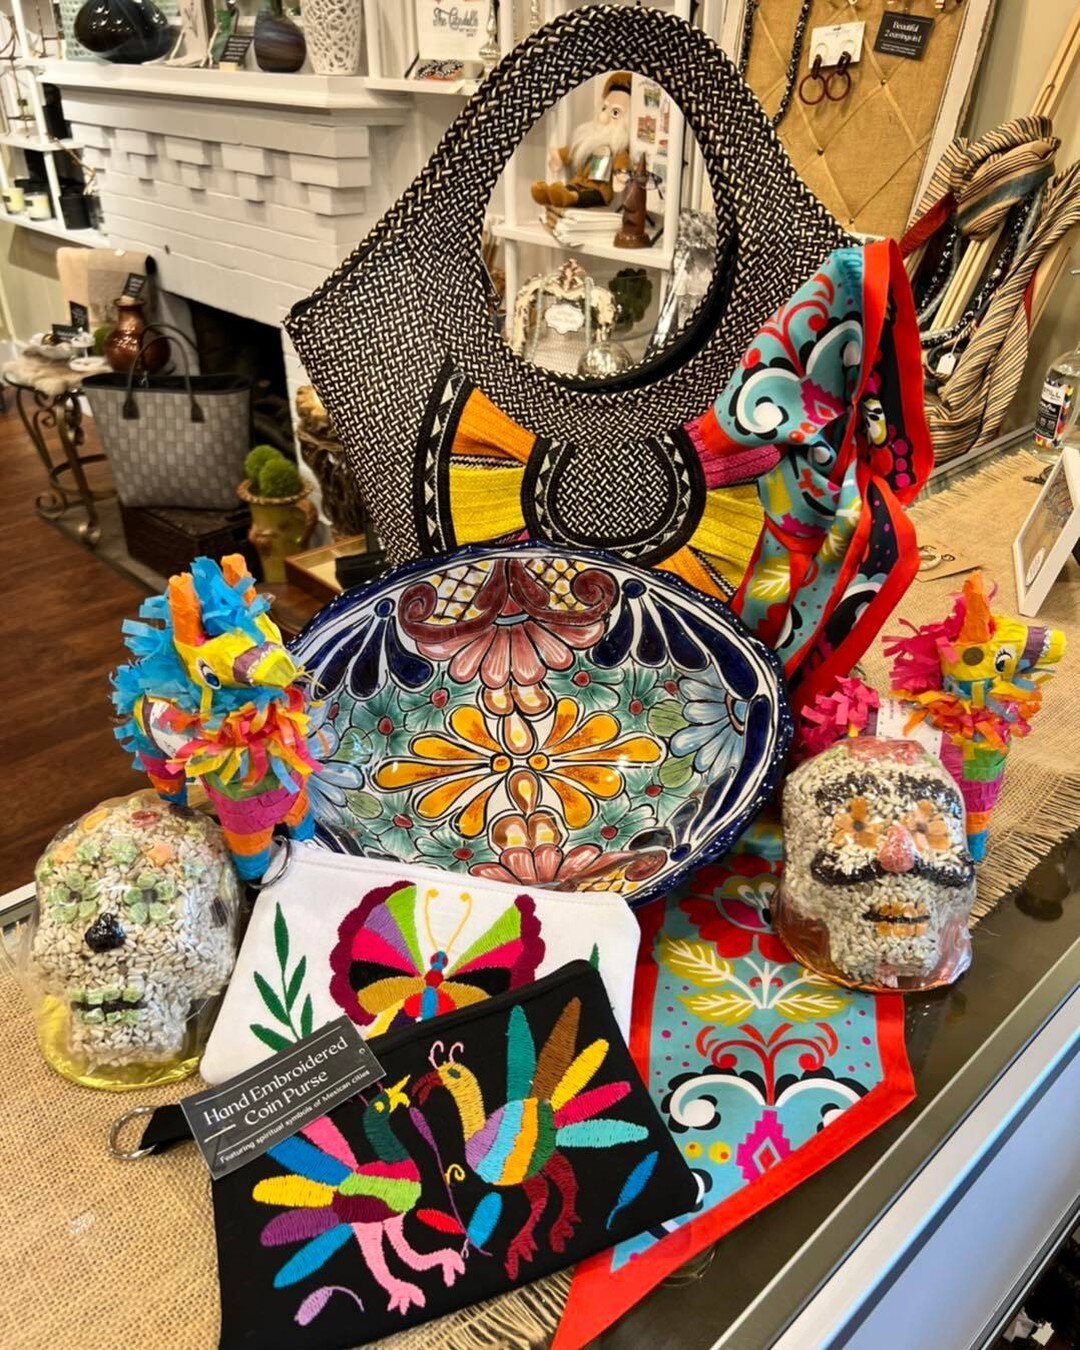 Come shop our hand crafted items today to celebrate Cinco de Mayo!! Great options for graduation gifts too! 

Table top pi&ntilde;atas, coin purses, The Fort Twilly Scarf, Seed Skulls (for the birds), and Talavera Fruit Bowl. 

#cincodemayo #graduati